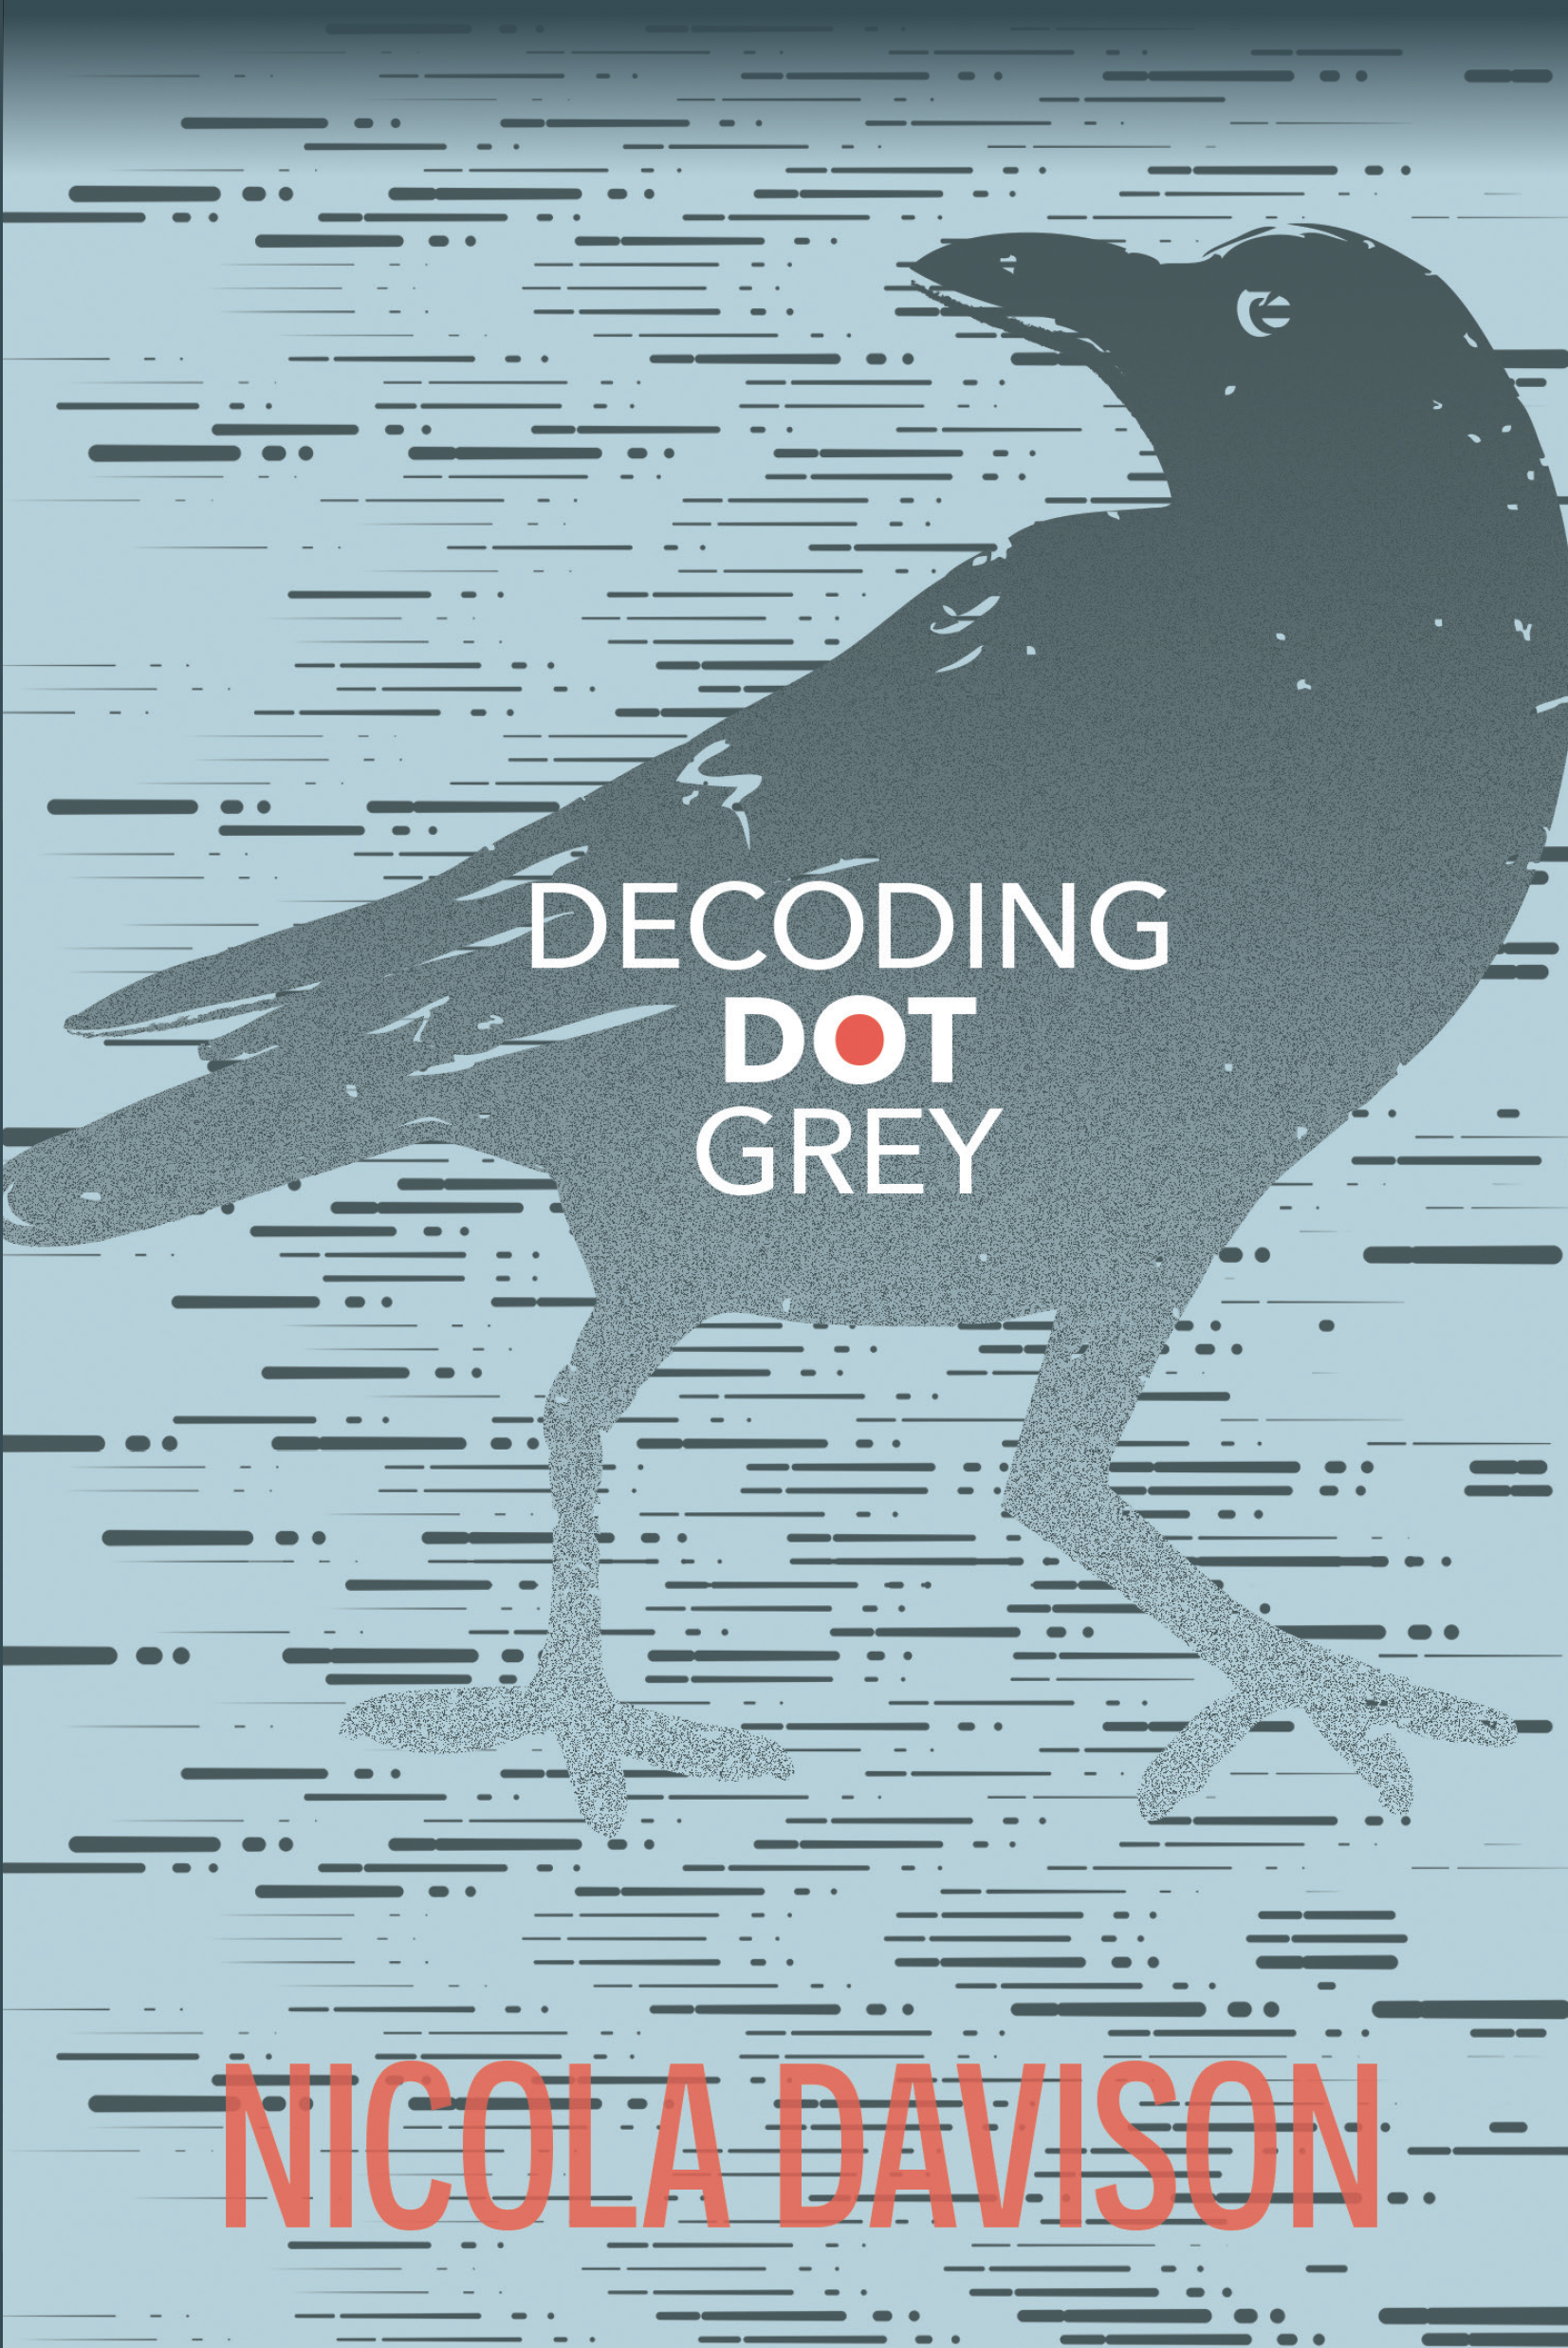 A pale blue book cover with an illustration of a crow overlayed on a background of Morse code